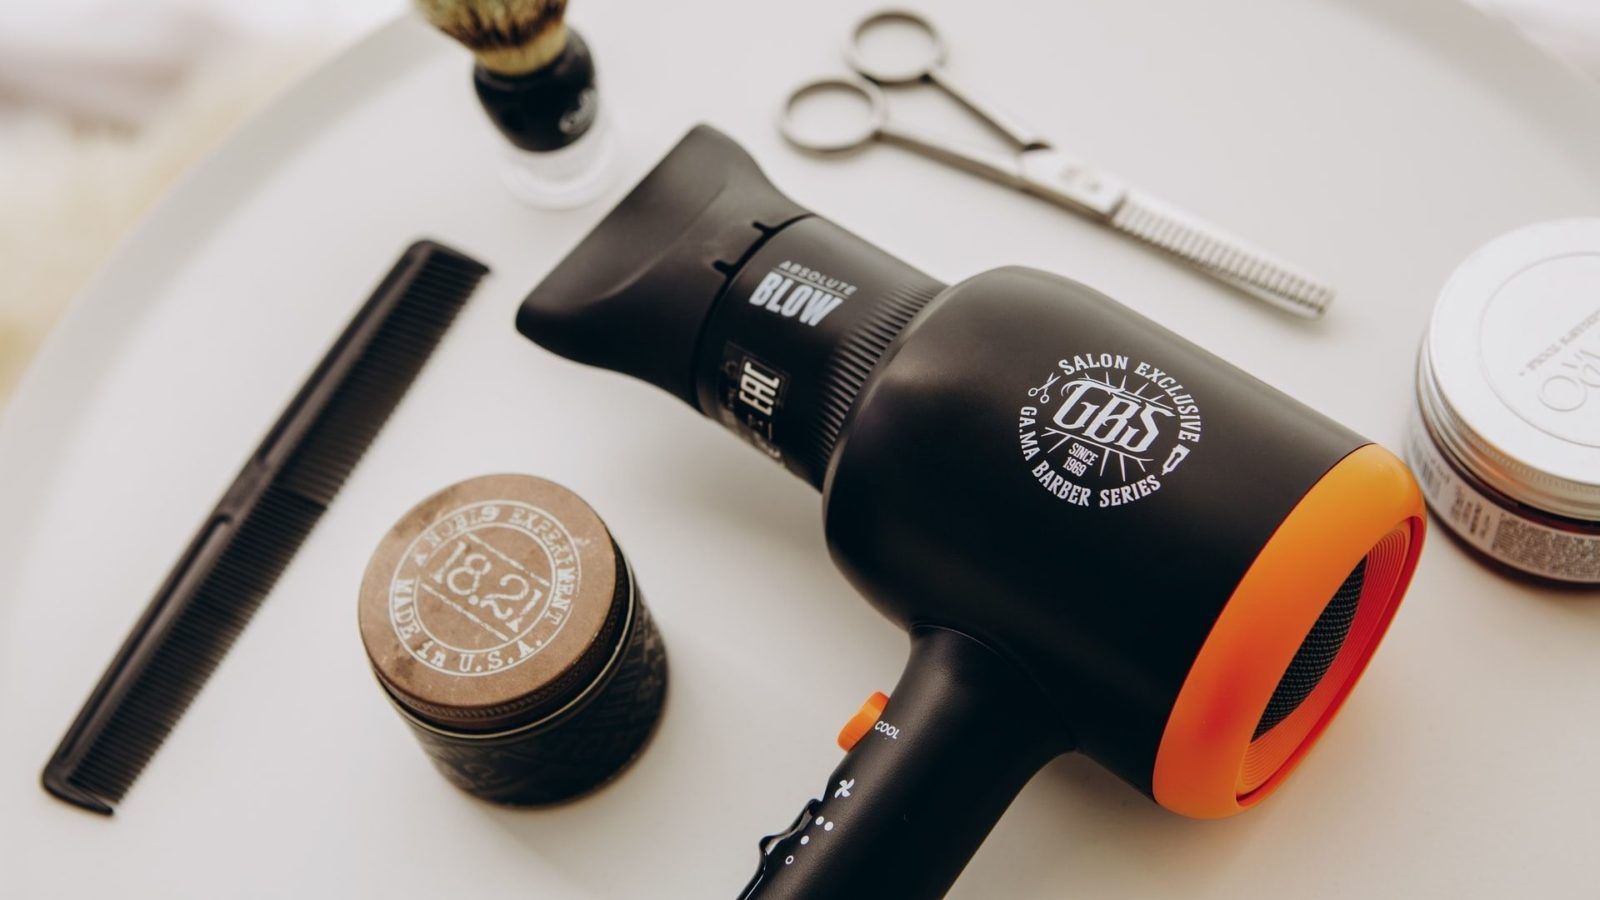 How To Use Shrink Wrap With A Hair Dryer